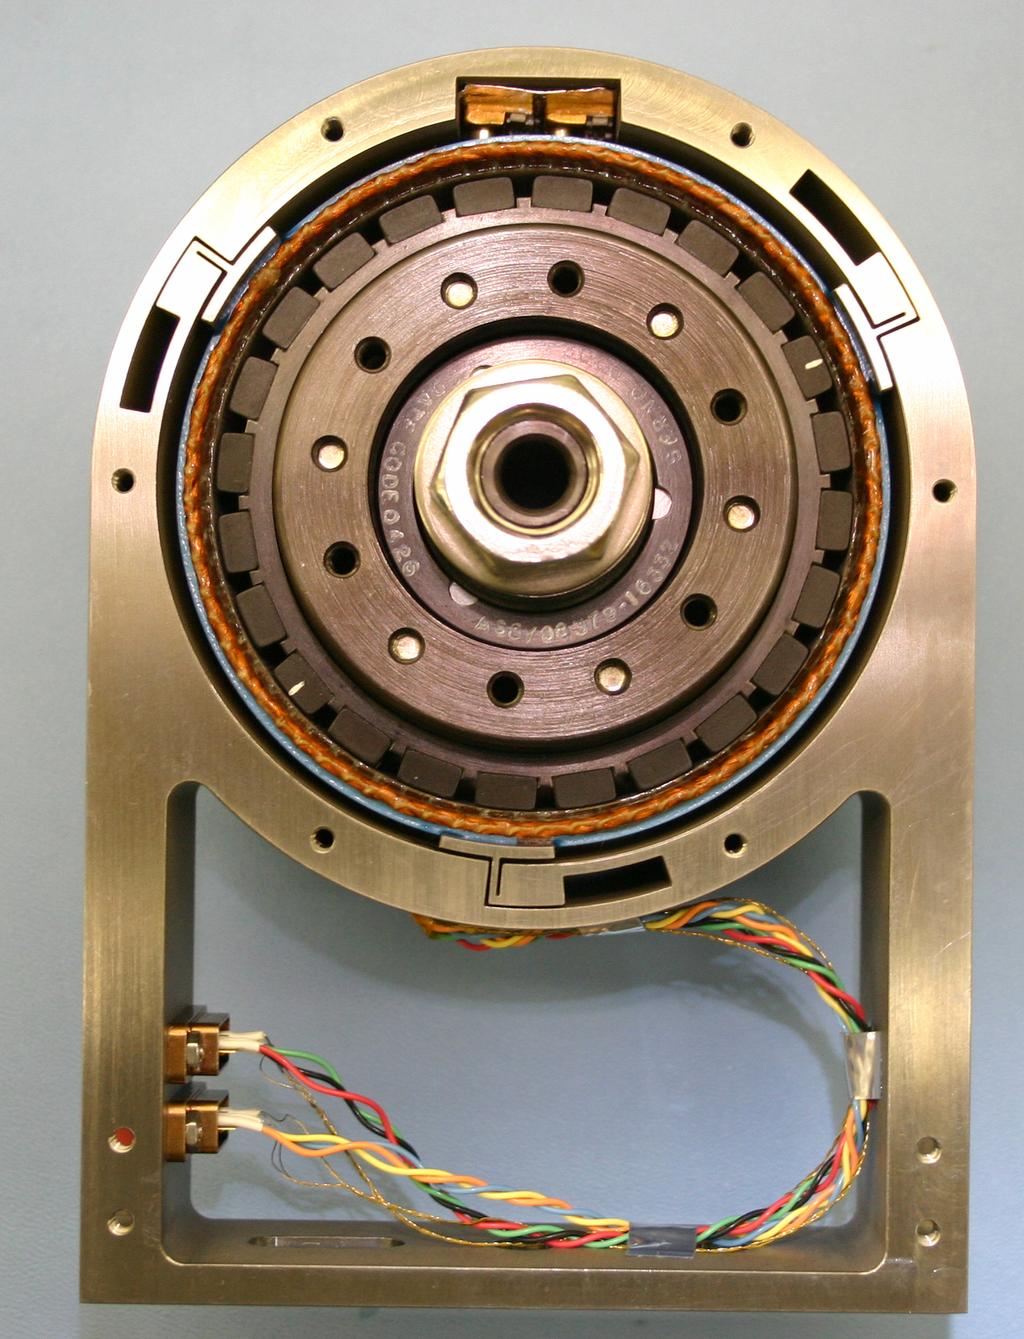 identical to those of the proposed flight bearings. Inductive sensors were successfully used to provide position feedback. Figure 8: Filter Wheel Assembly Prototype 3.